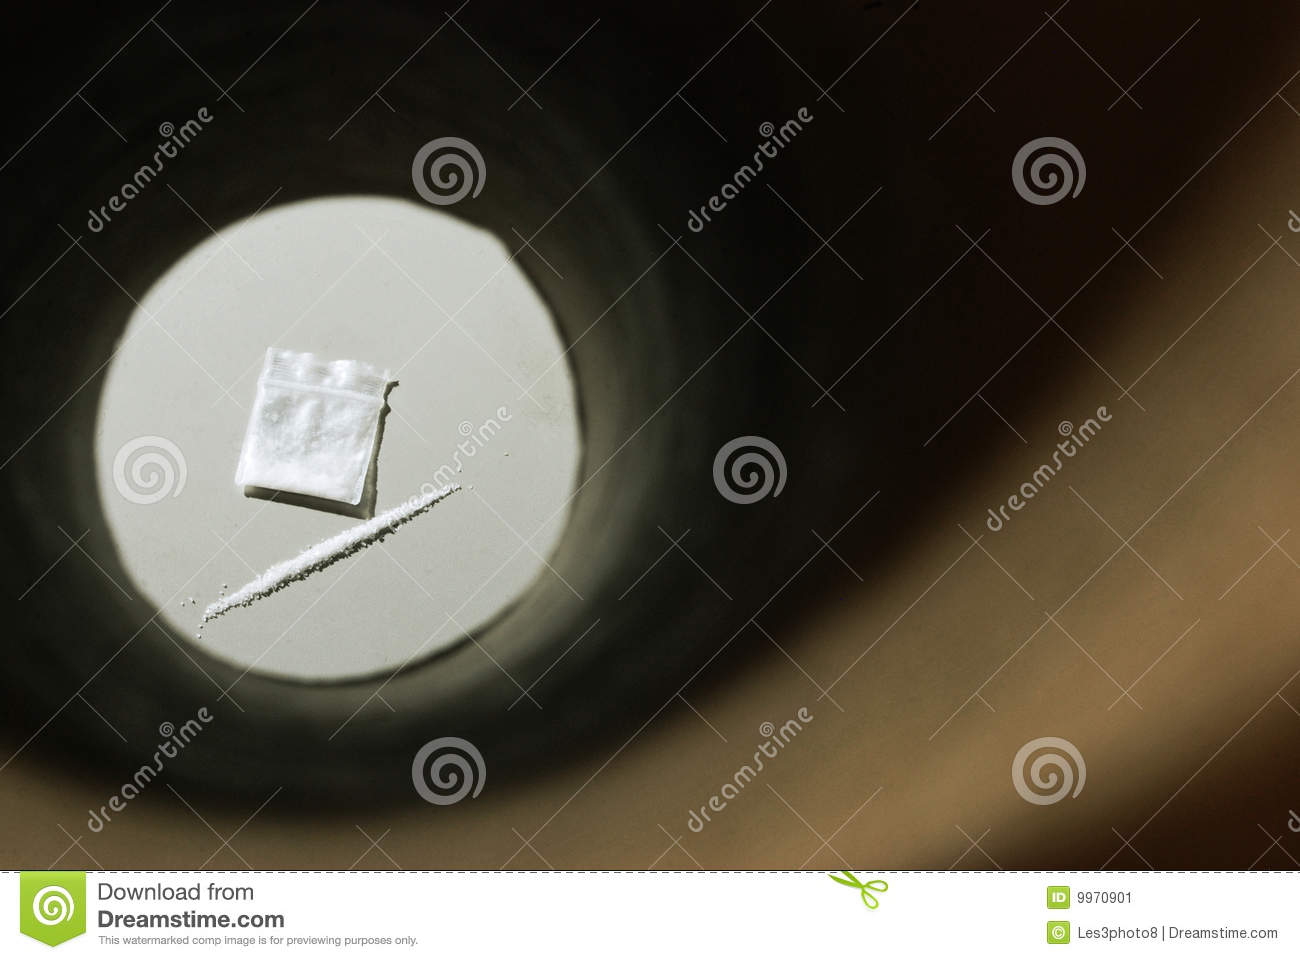 Cocaine And Little Plasic Drug Baggie As Seen Through A Straw Or